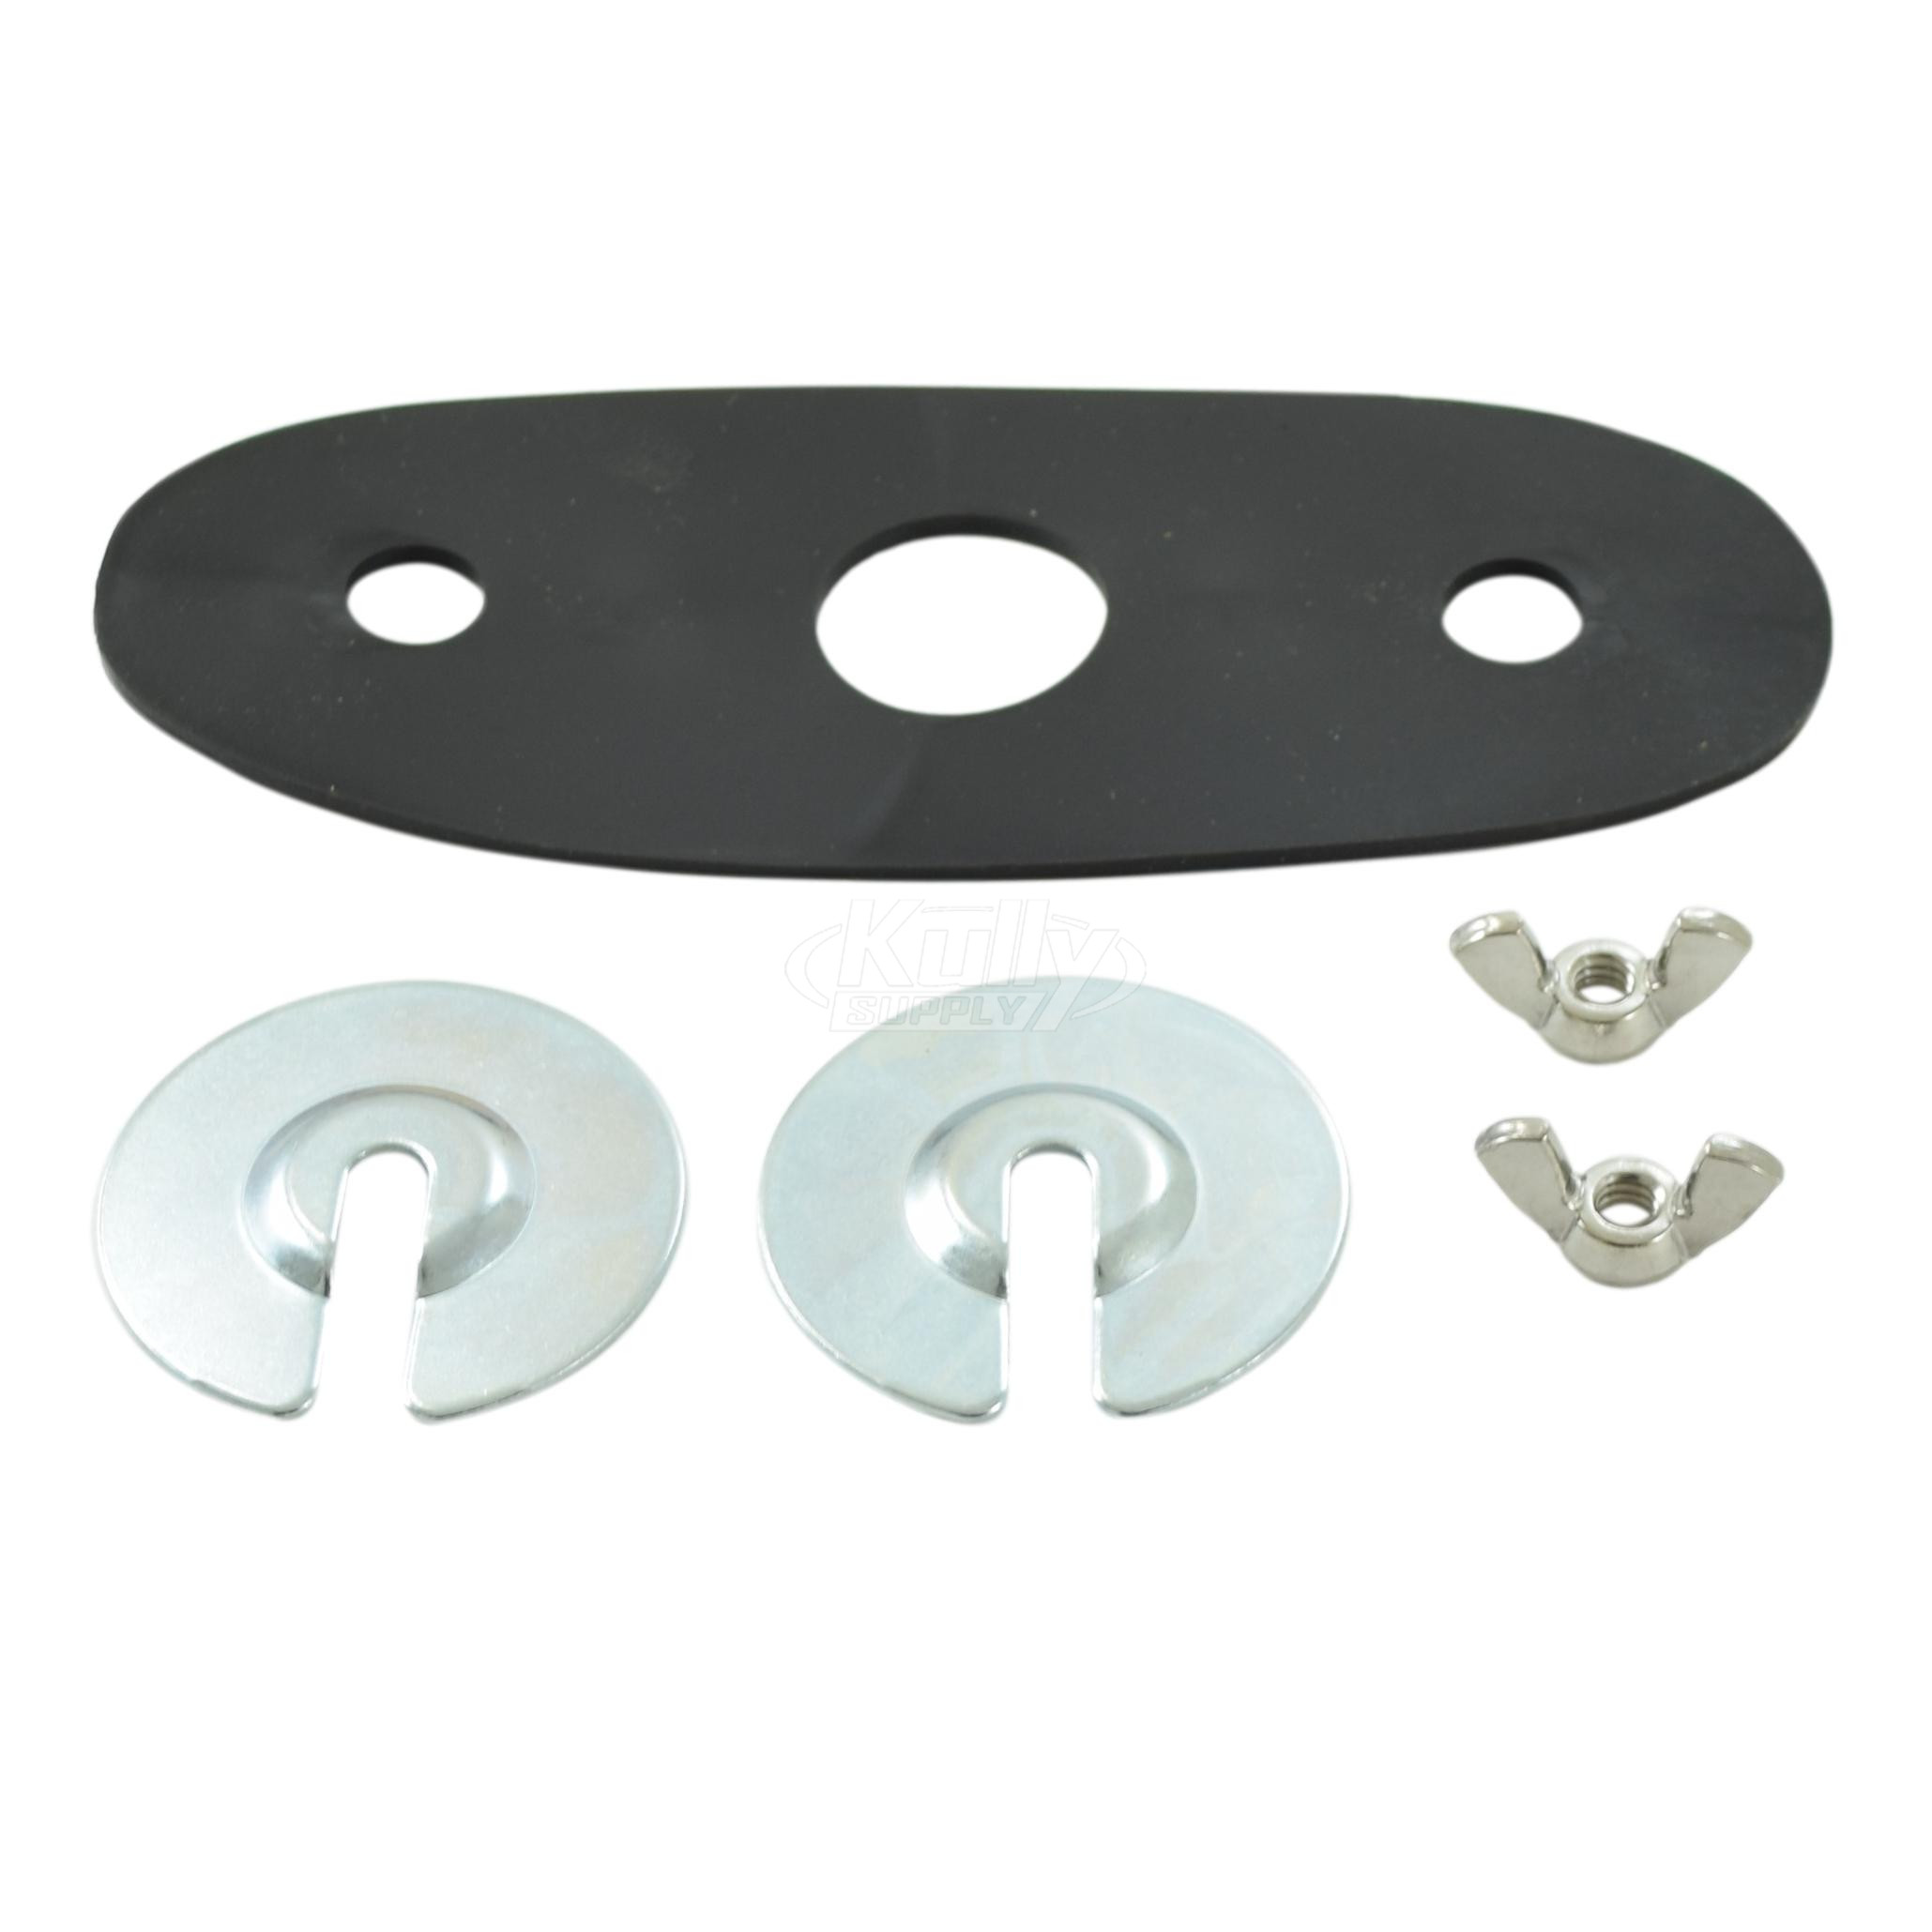 Sloan EFP75A Mounting Hardware Kit for ETF600/EBF650 Faucets